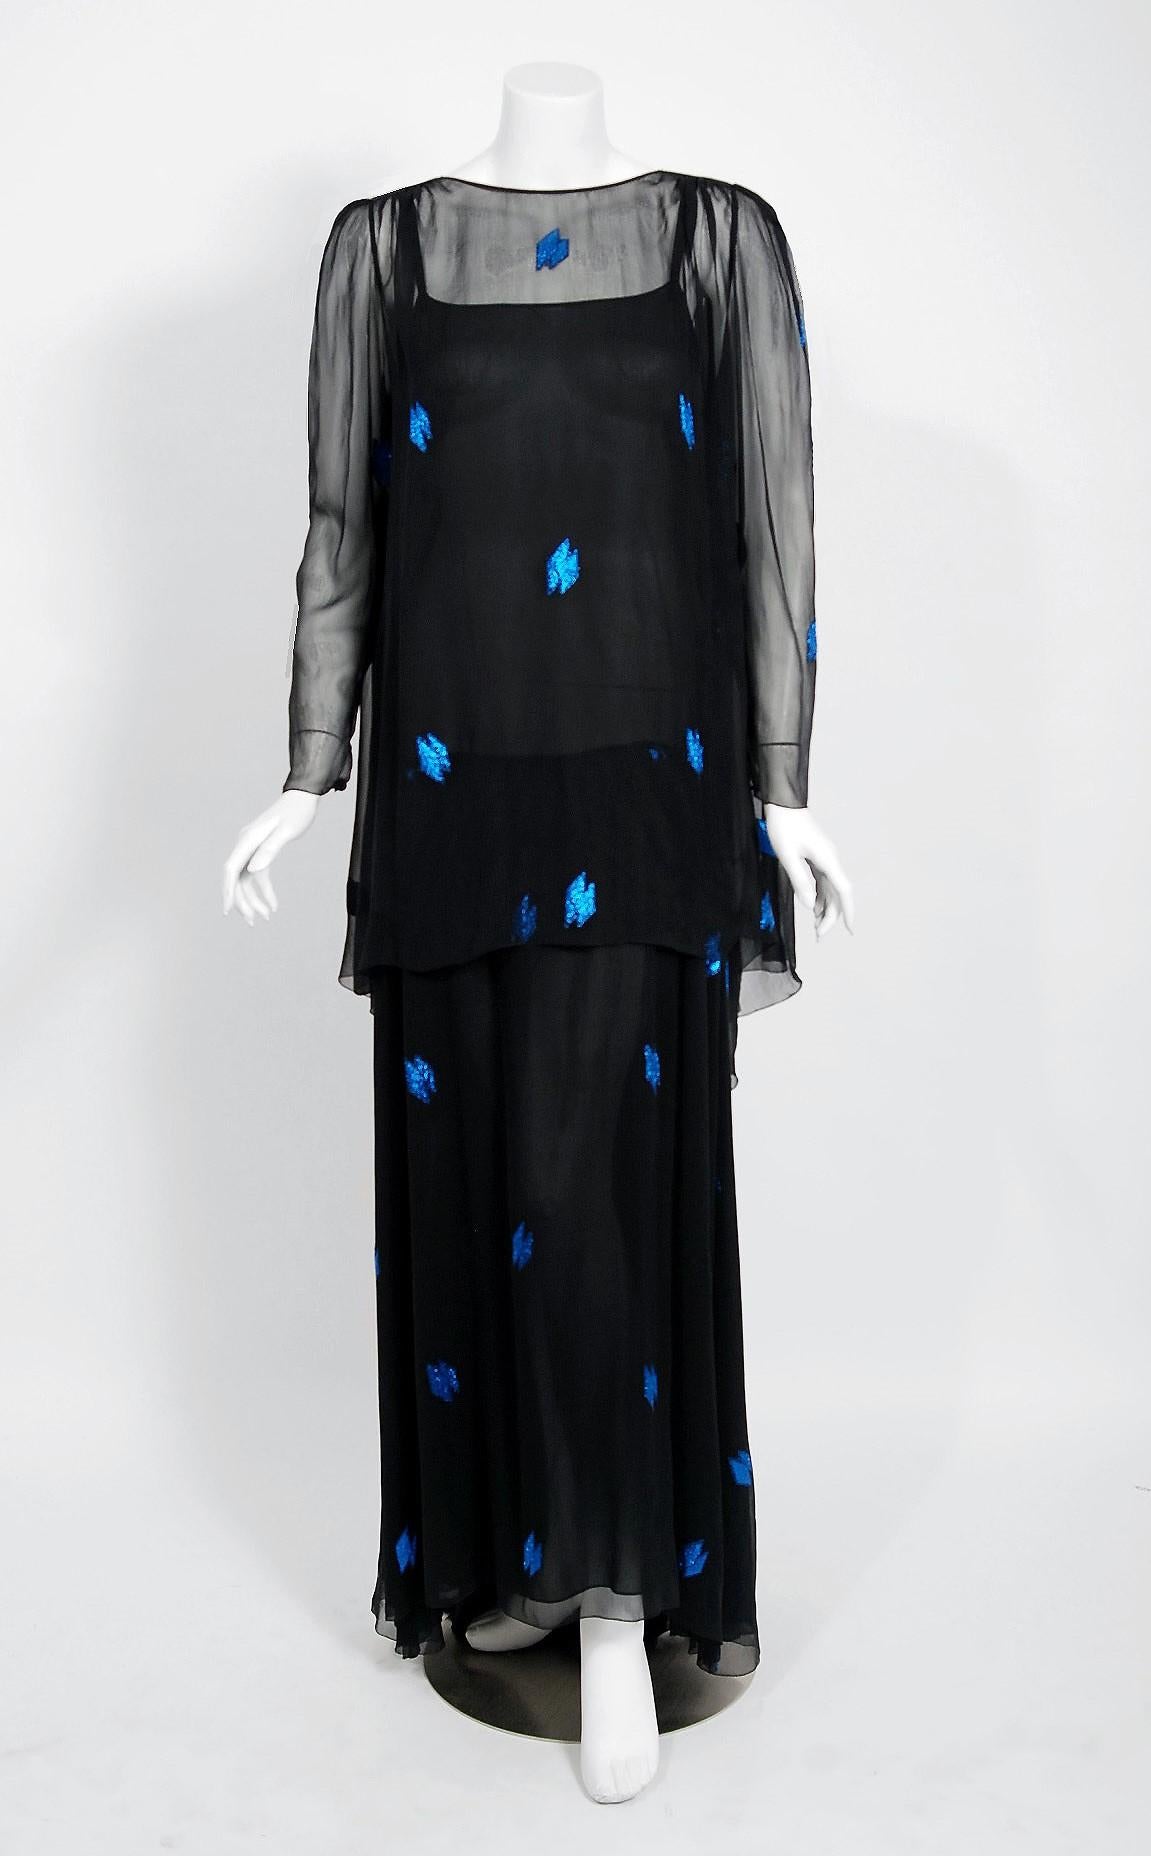 A gorgeous Christian Dior Paris black and sapphire blue show-stopper dating back to their 1972 collection.  When the talented Marc Bohan took over as head designer in 1960, he continued the Dior tradition of elegant design and this beautiful